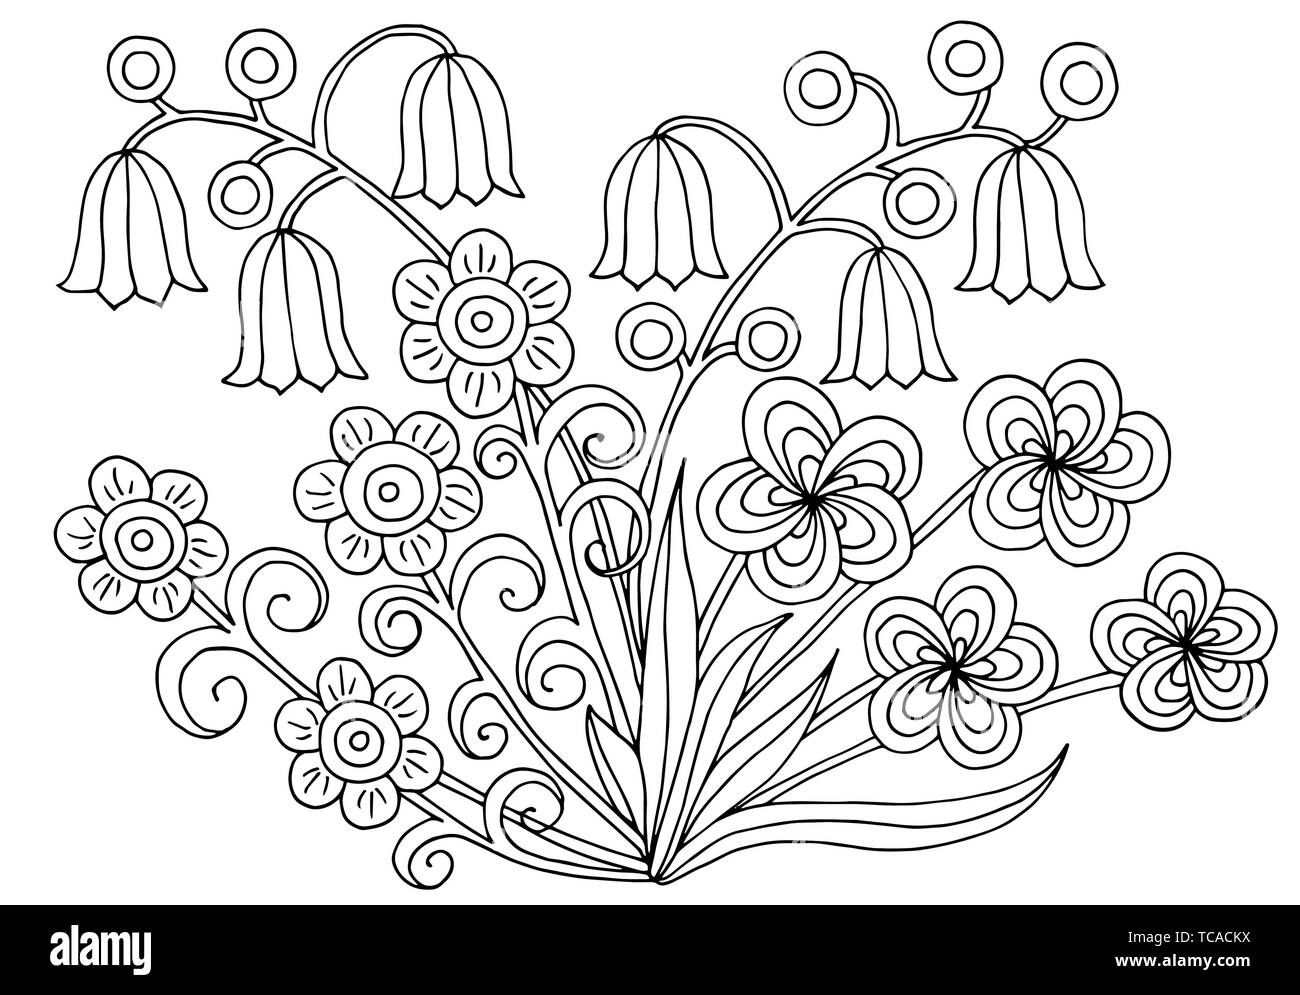 Hand drawn flower patterns, coloring page for children and adults Stock Vector